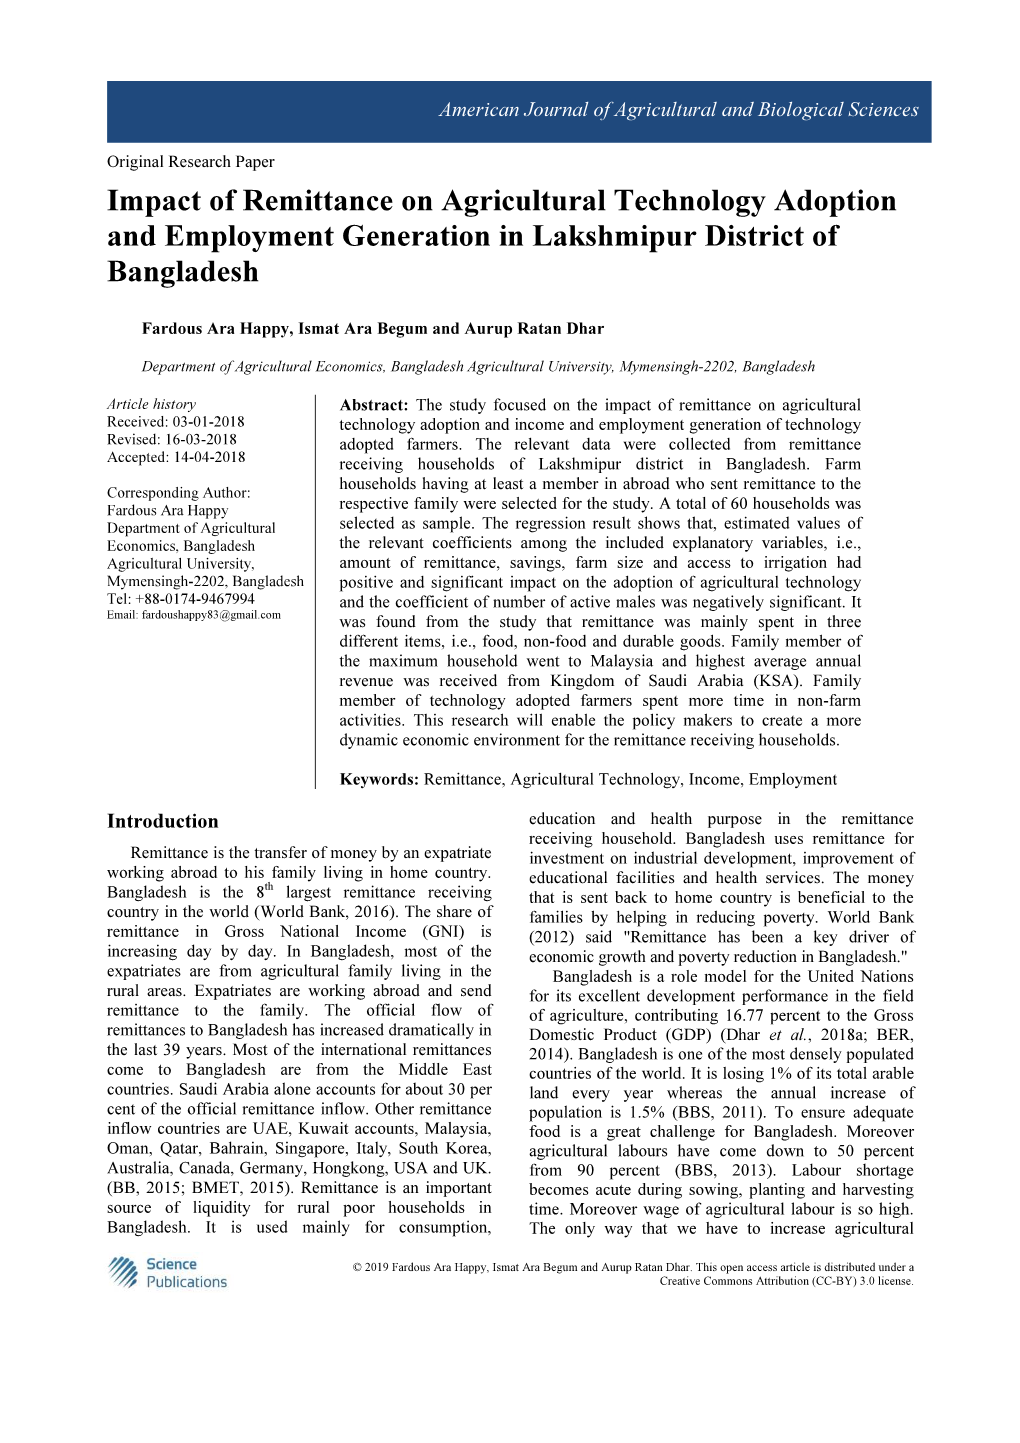 Impact of Remittance on Agricultural Technology Adoption and Employment Generation in Lakshmipur District of Bangladesh